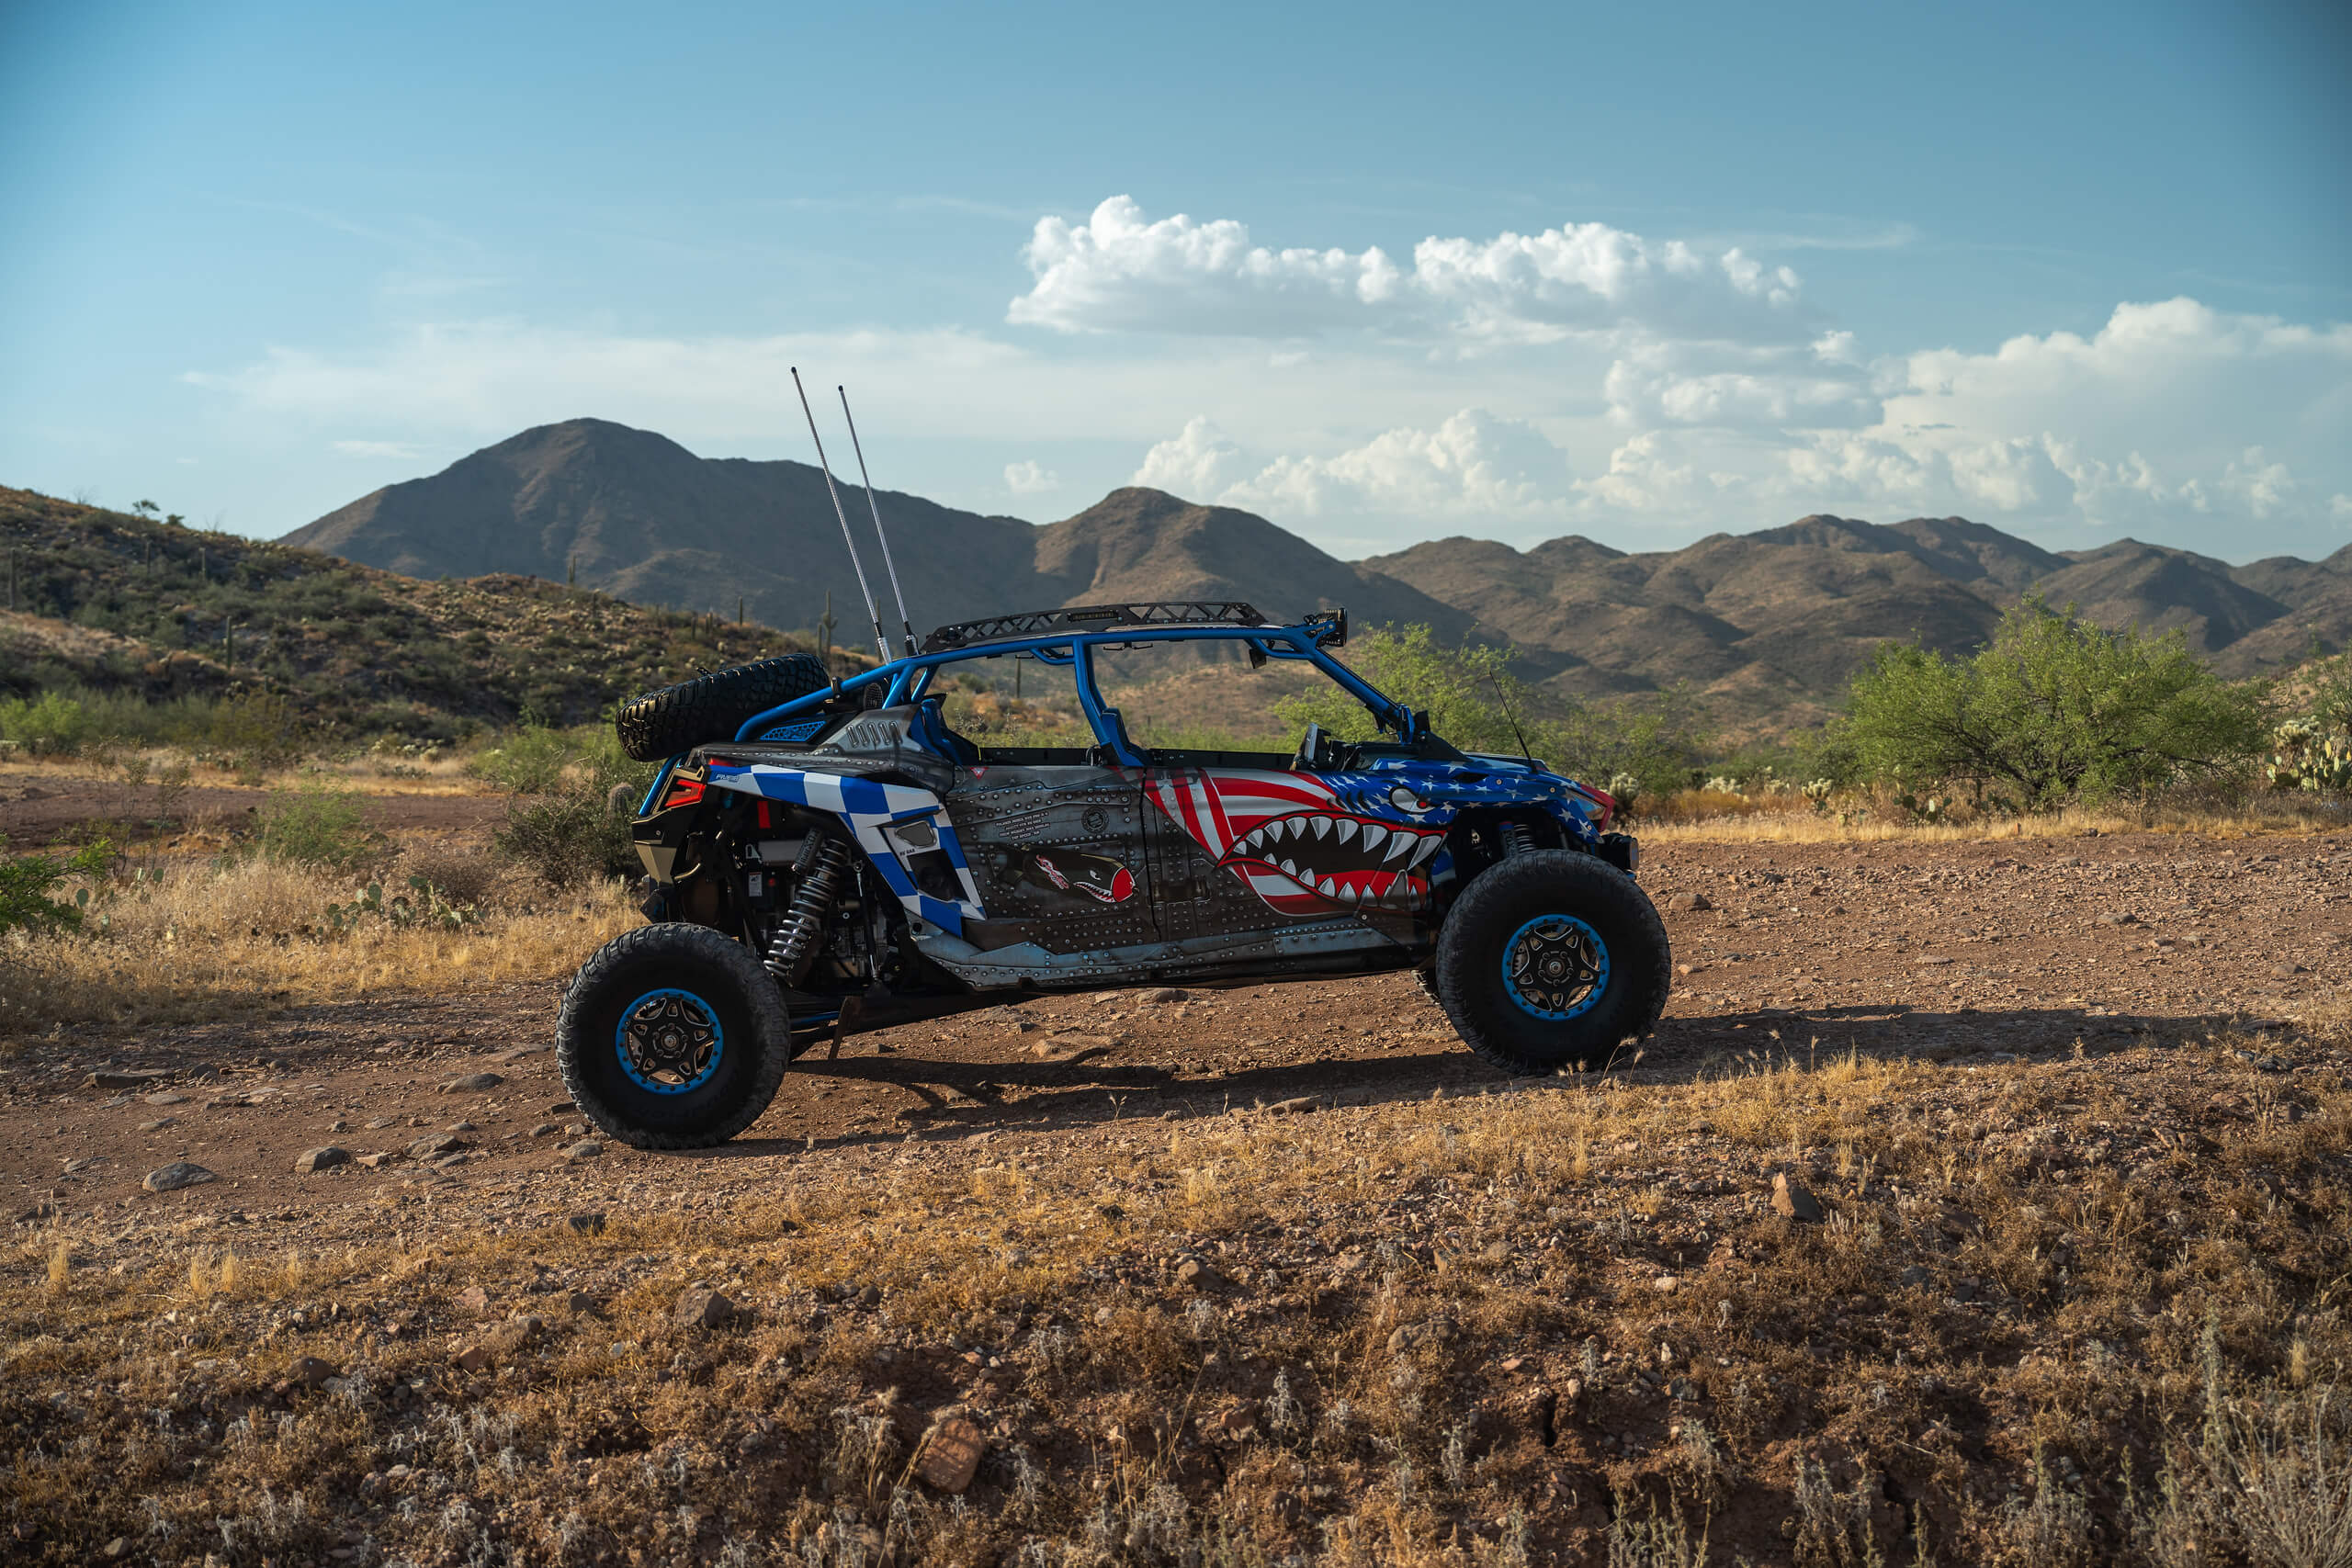 Mike Ericksons Polaris RZR Pro R Custom Build By Jagged X Offroad 1